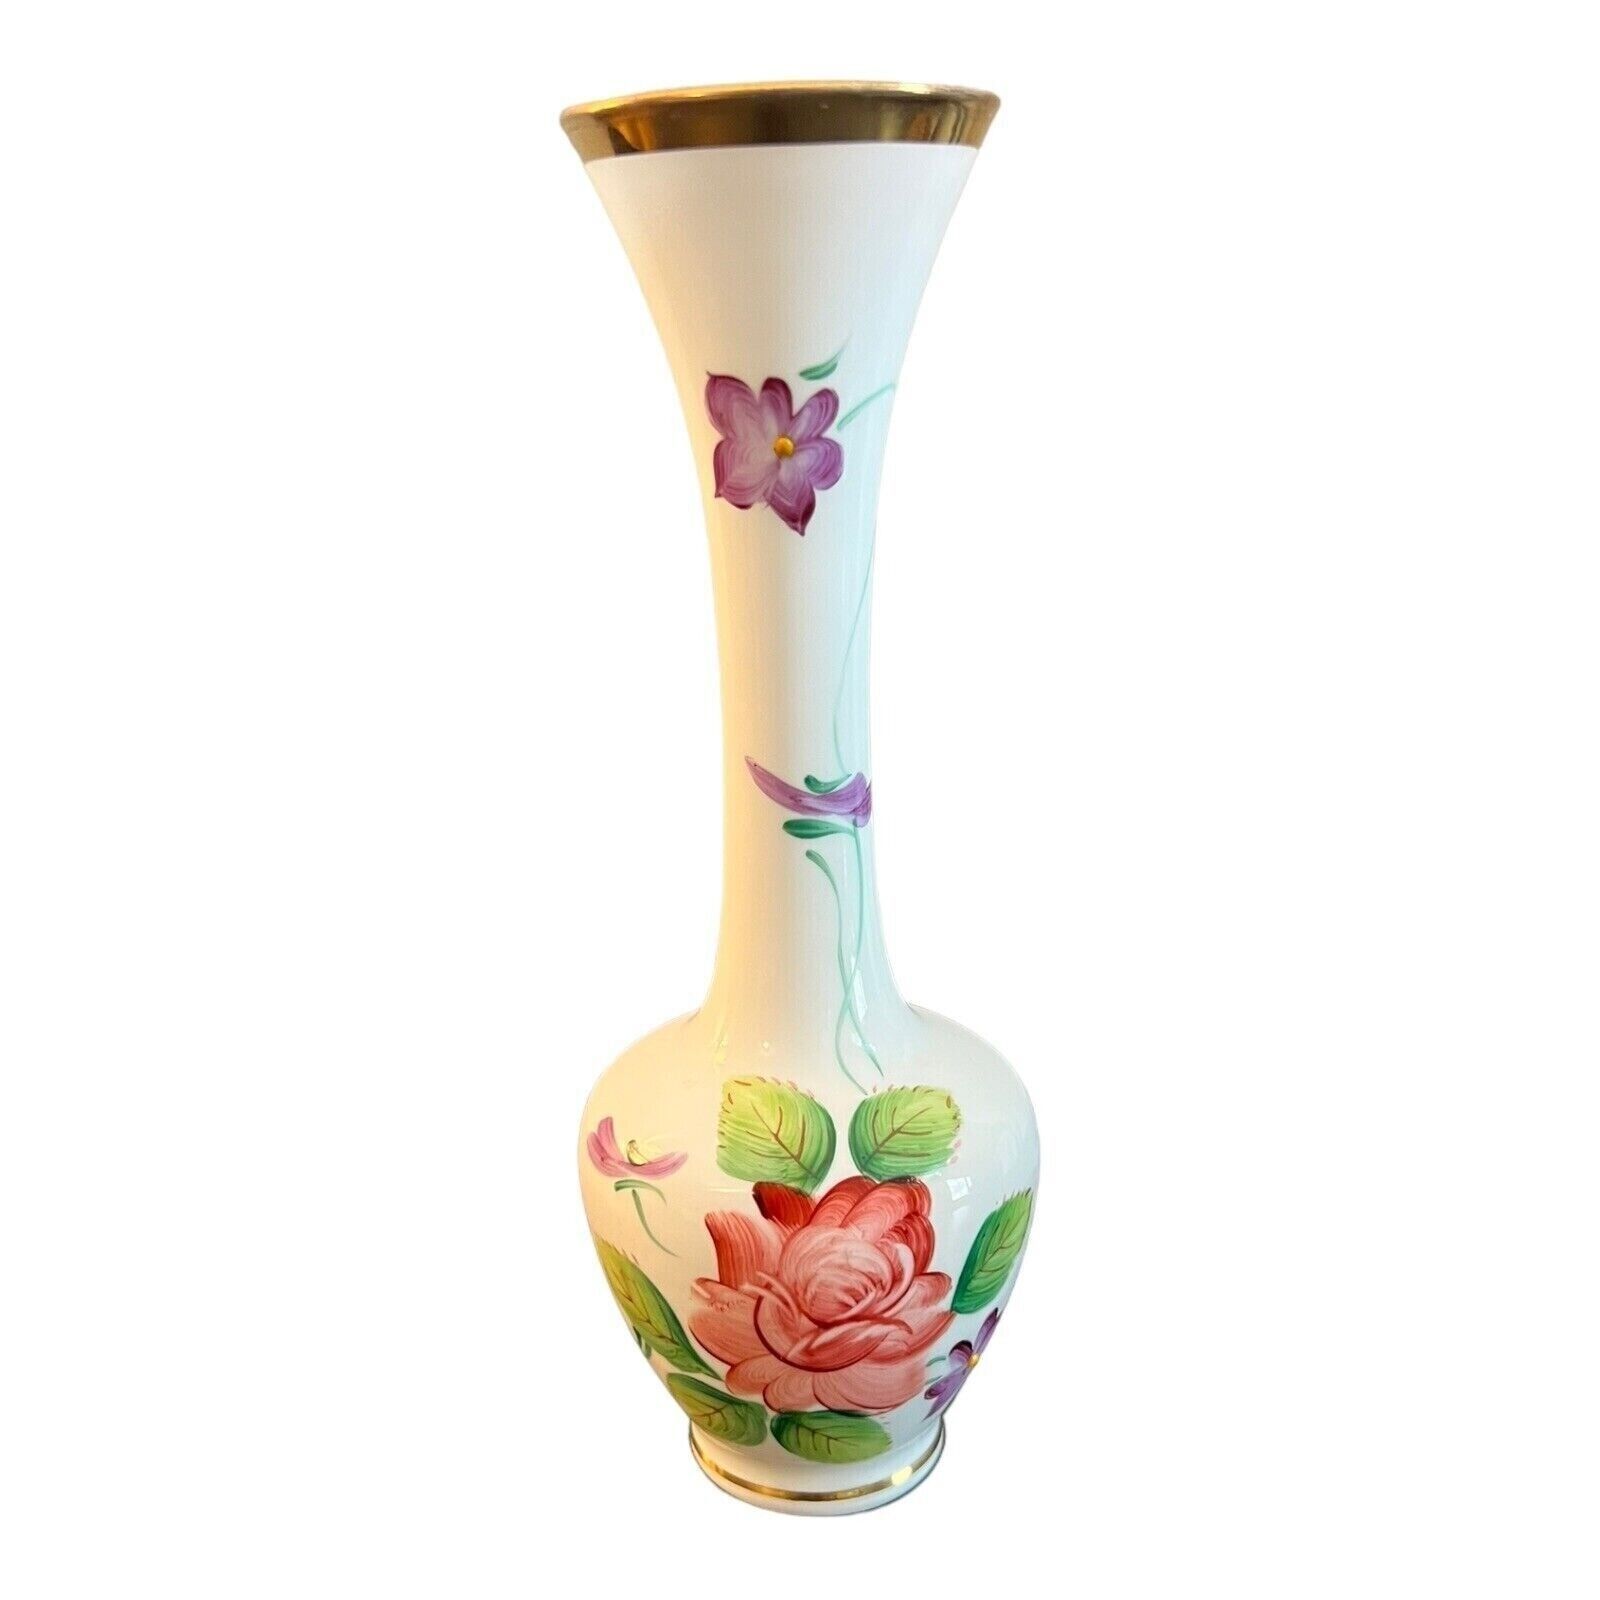 VTG  Enesco Made in Japan Bud Vase White With Floral Pattern Gold Trim  8" Tall - £11.00 GBP